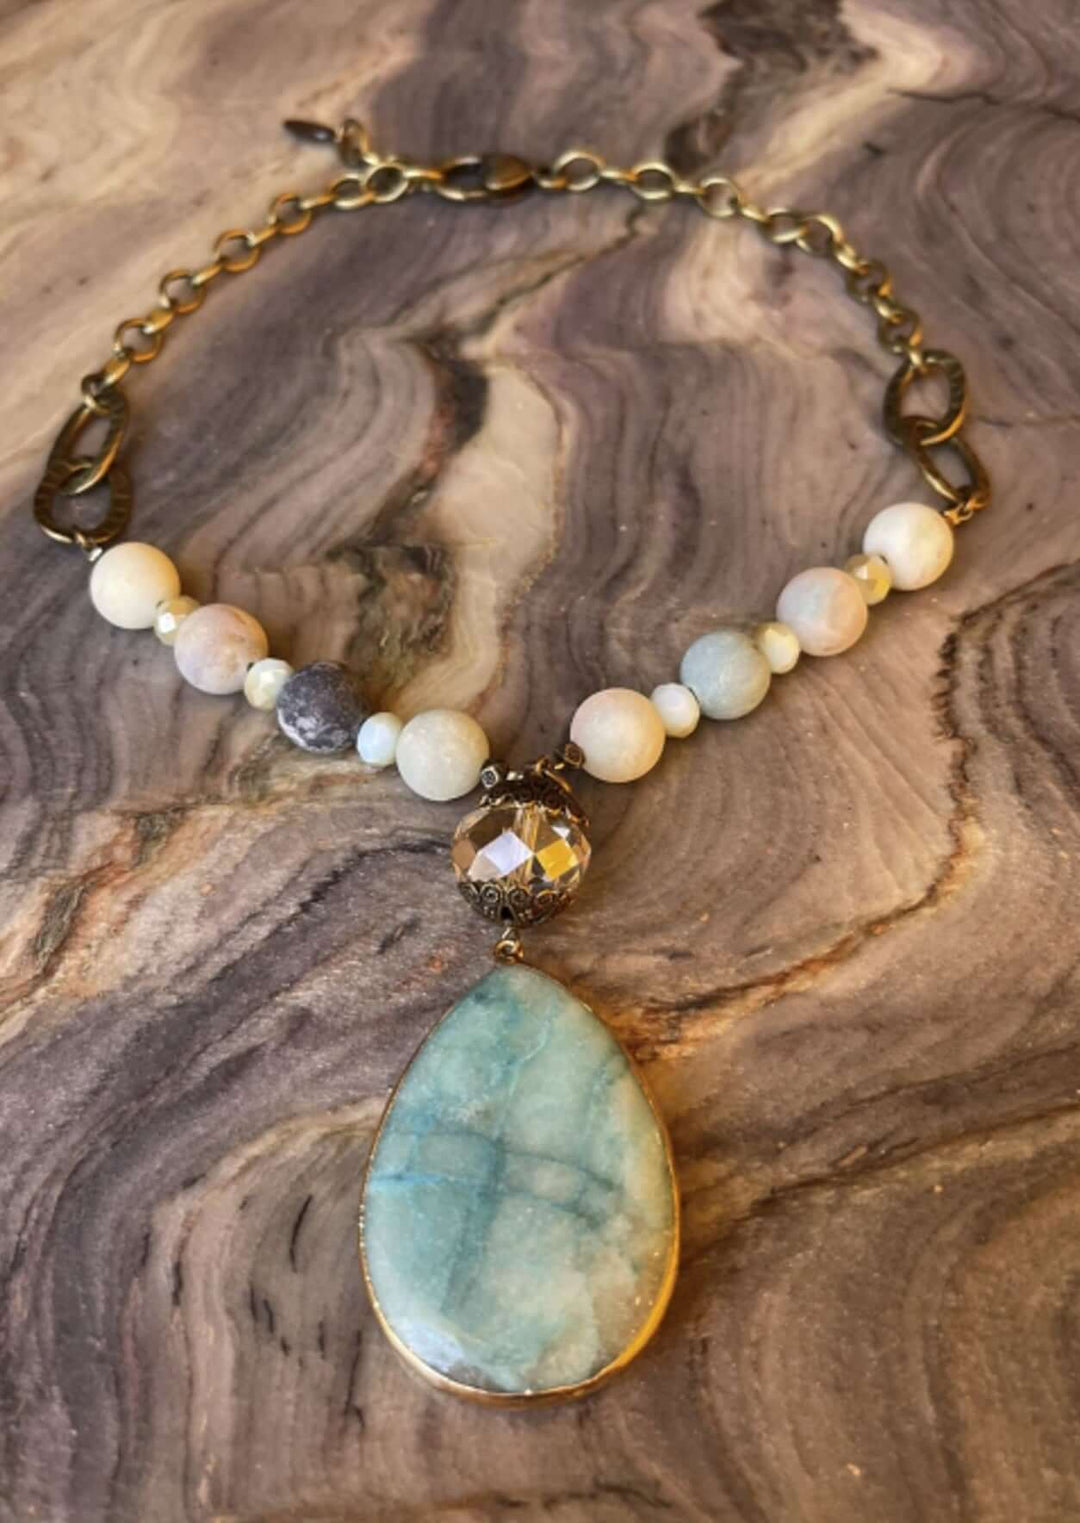 Ladies Turquoise Natural Stone Pendant Beaded Necklace. Handmade in USA, This beautiful piece has an adjustable heart clasp.